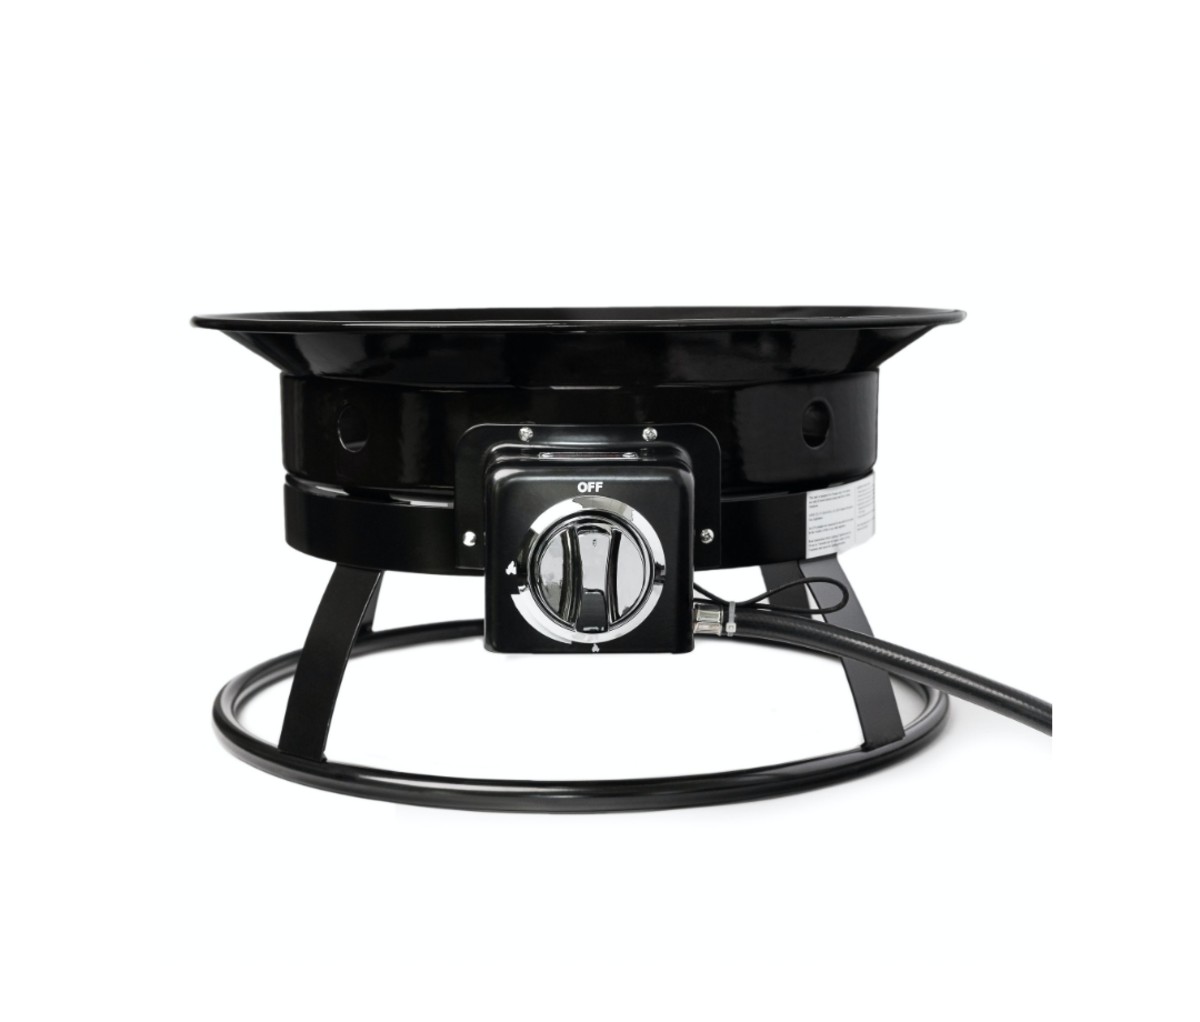 Kinger Home 19-Inch Portable Propane Fire Pit